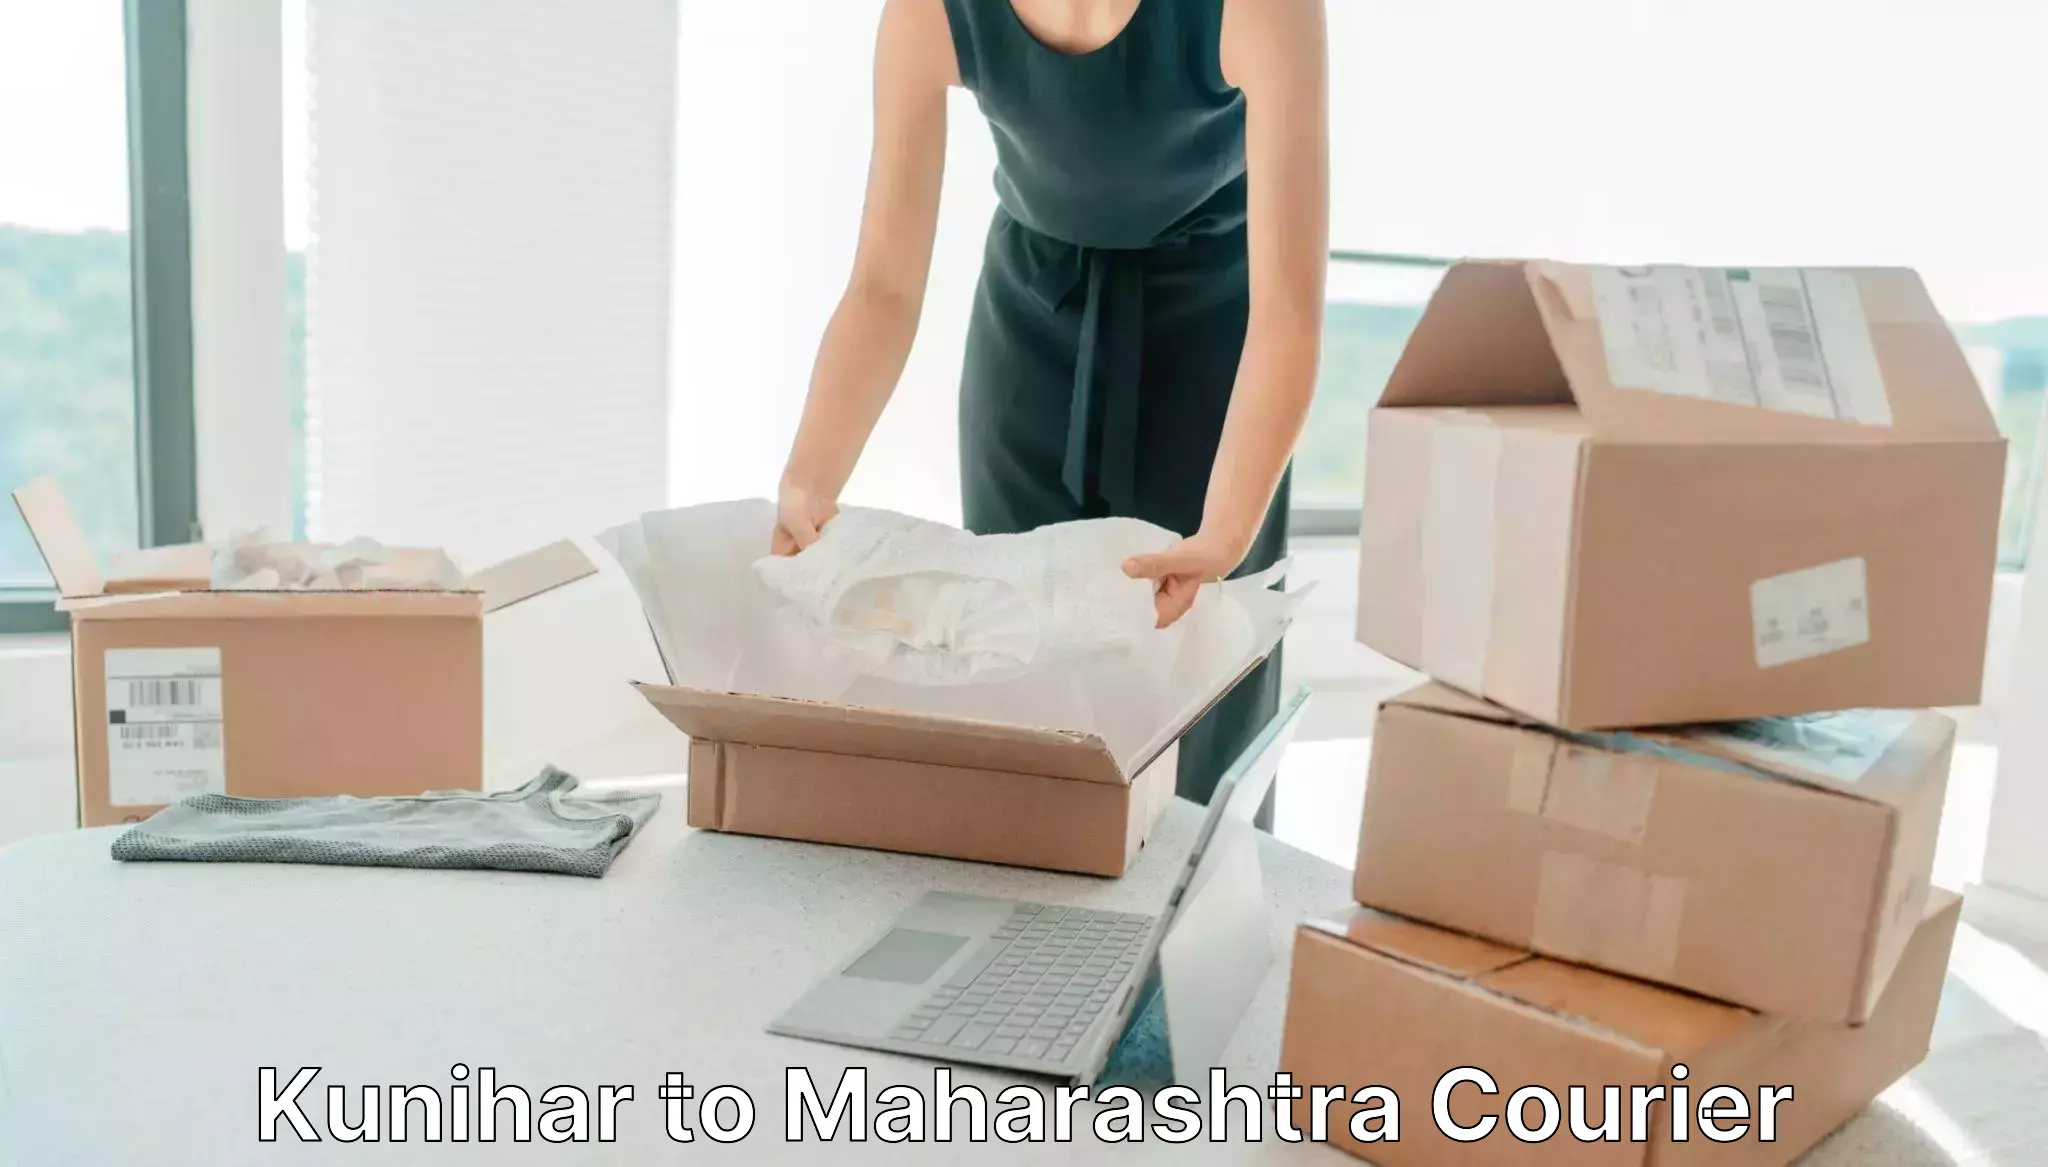 24-hour courier services in Kunihar to Sangamner